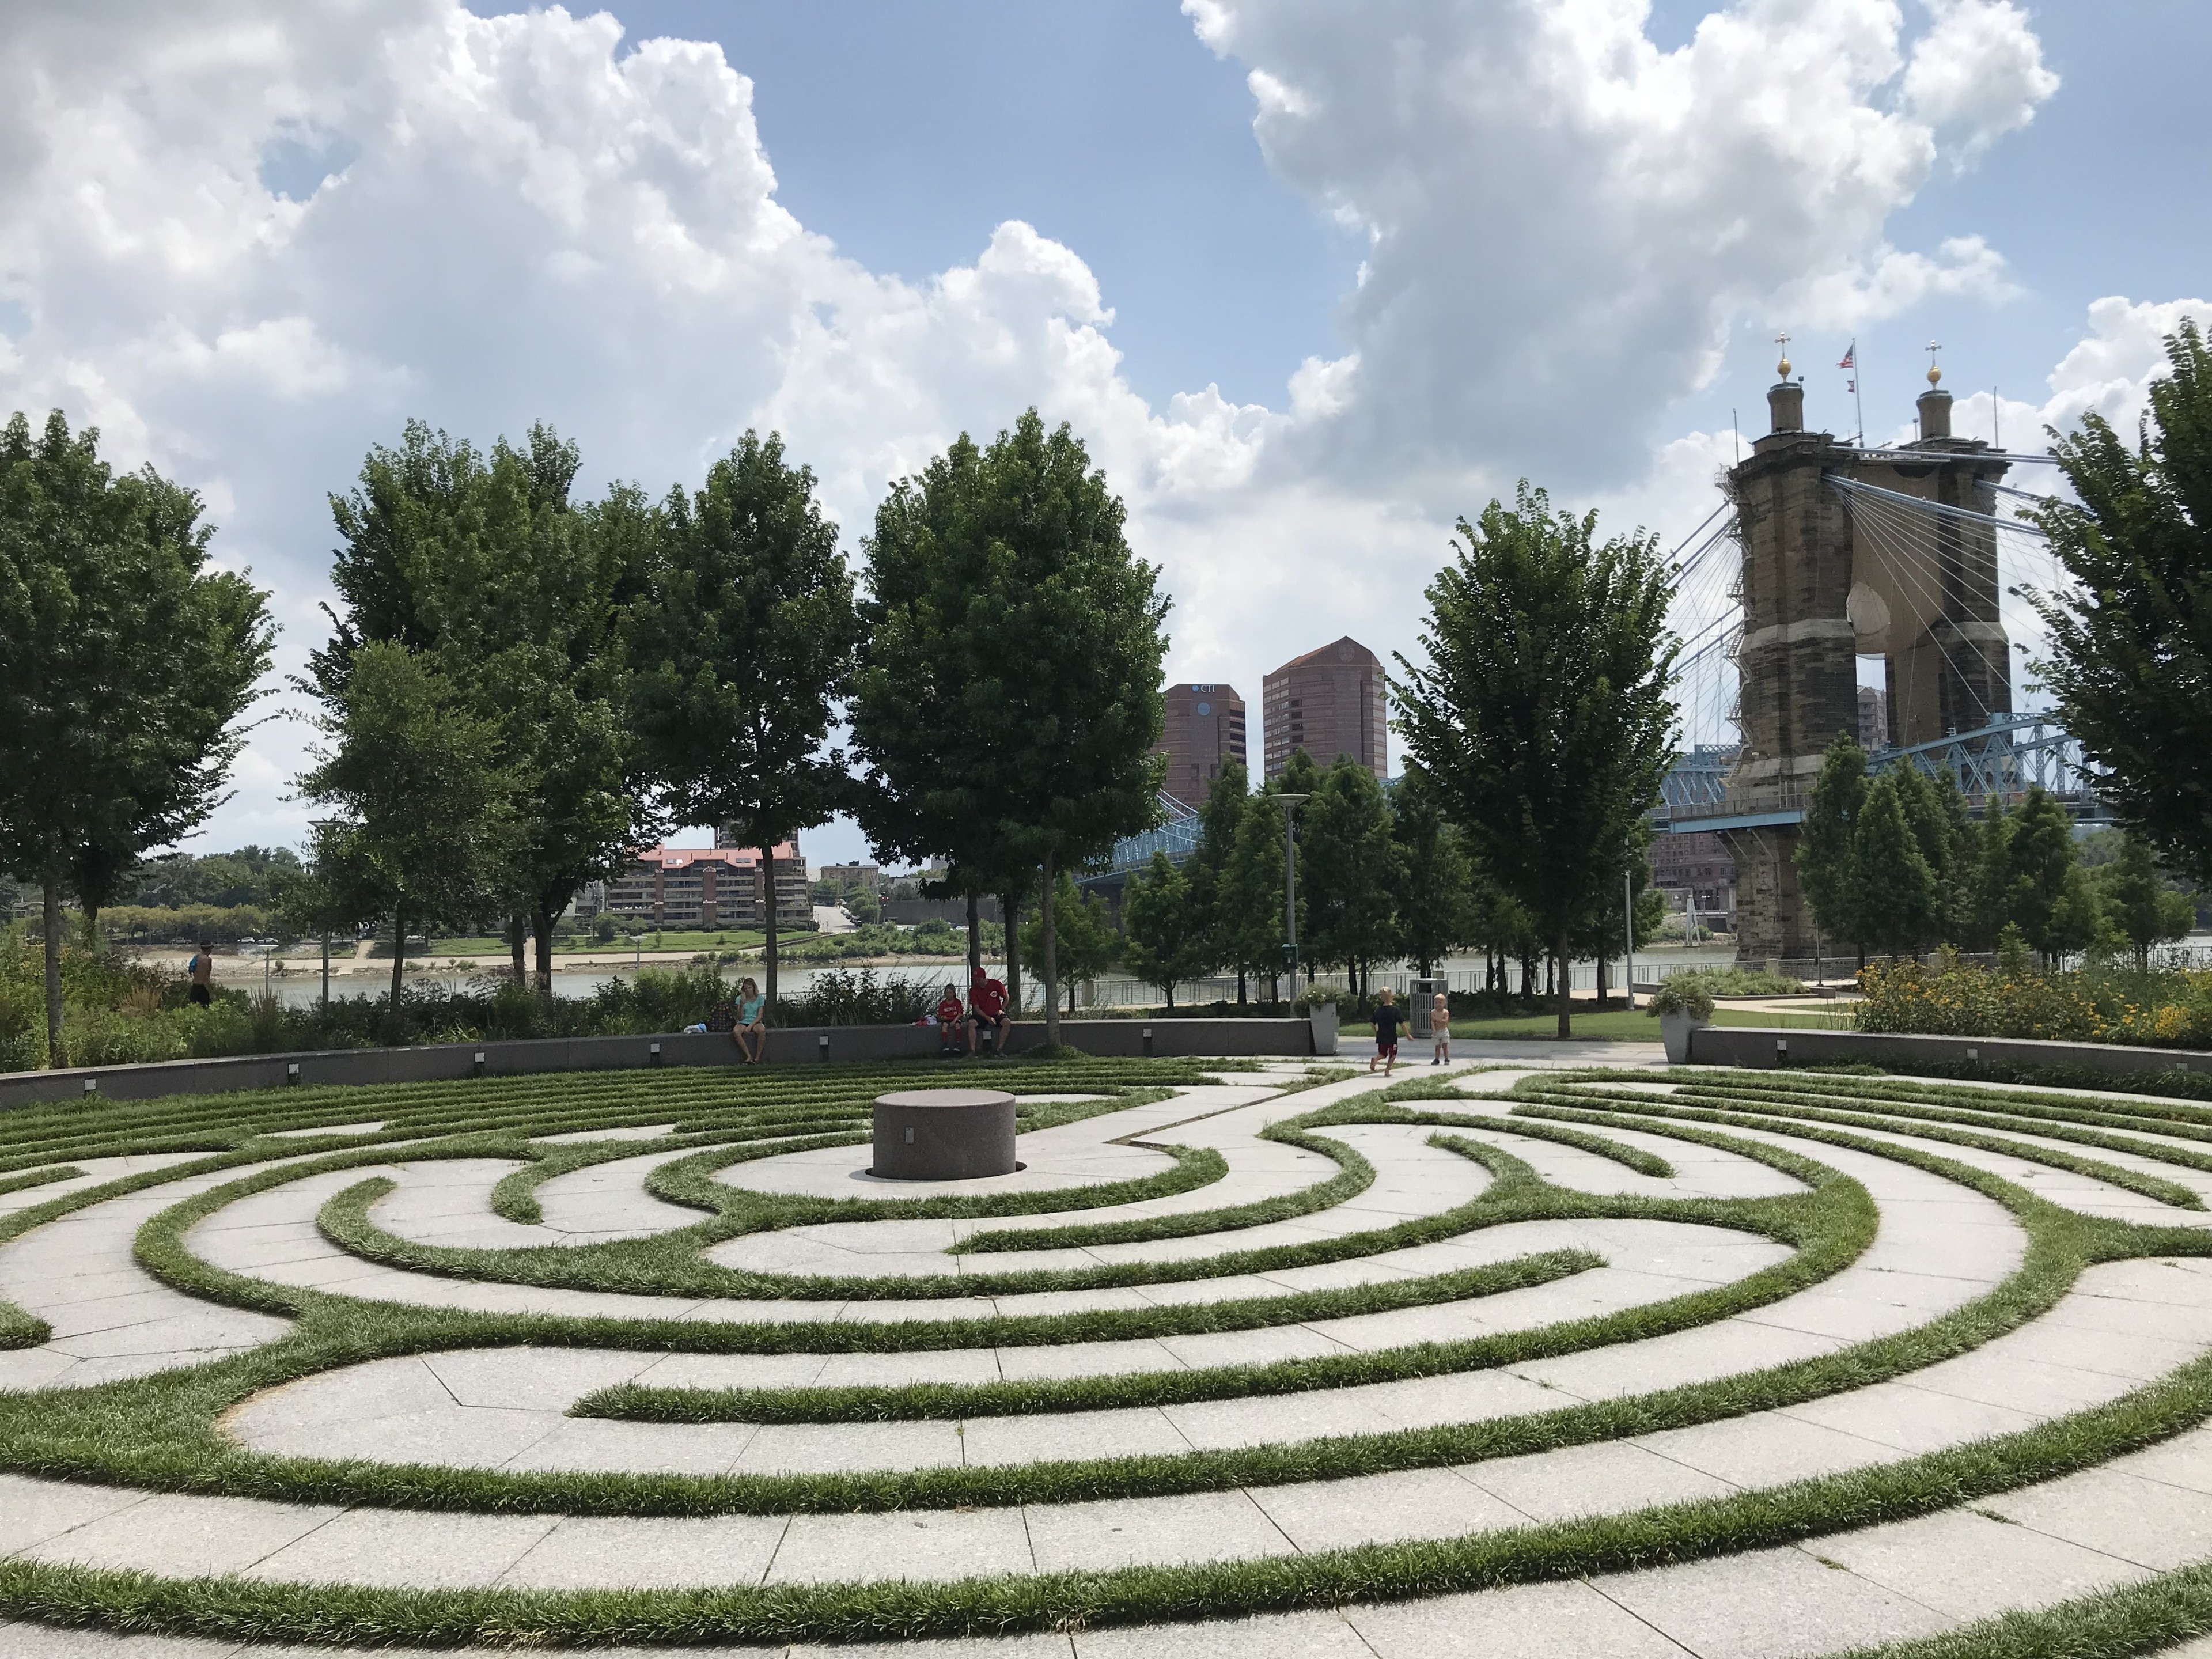 The Smale Riverfront Park is a great place to entertain your children, relax in a peaceful garden, or enjoy a picnic by the river. A labyrinth maze, various water play areas, a foot piano, a playground, and swings = endless fun!